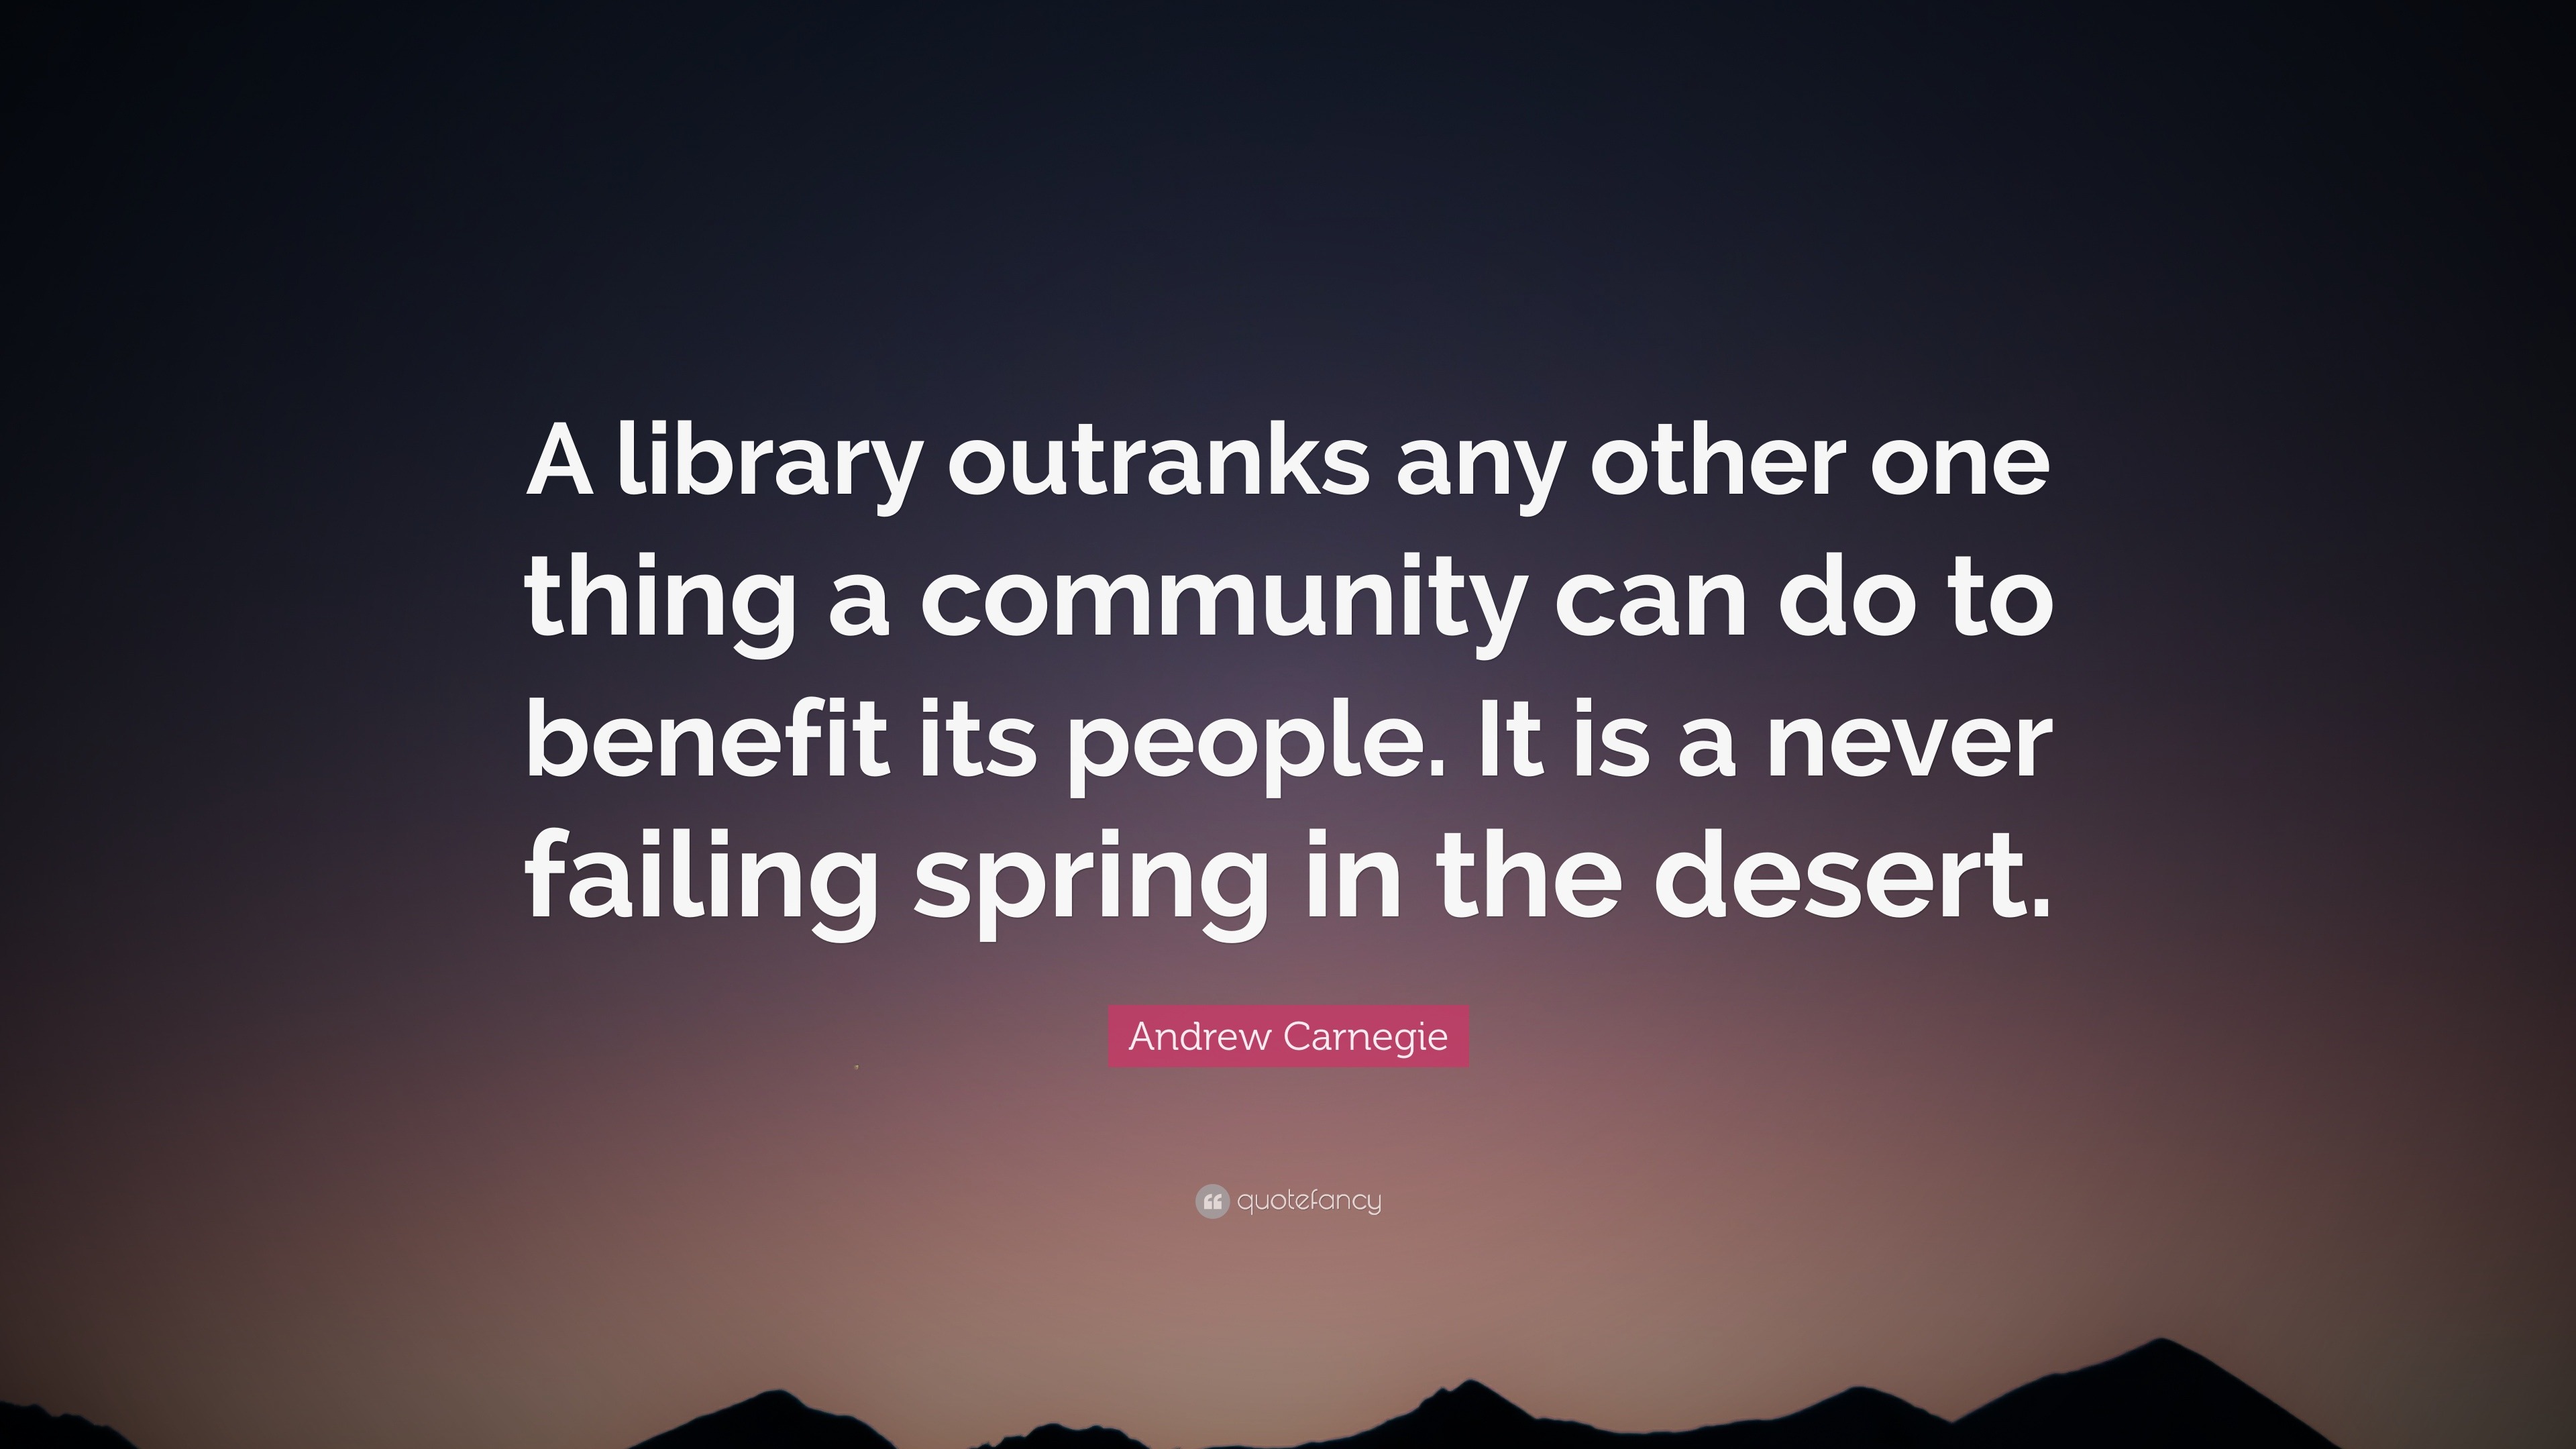 Andrew Carnegie Quote: “A library outranks any other one thing a